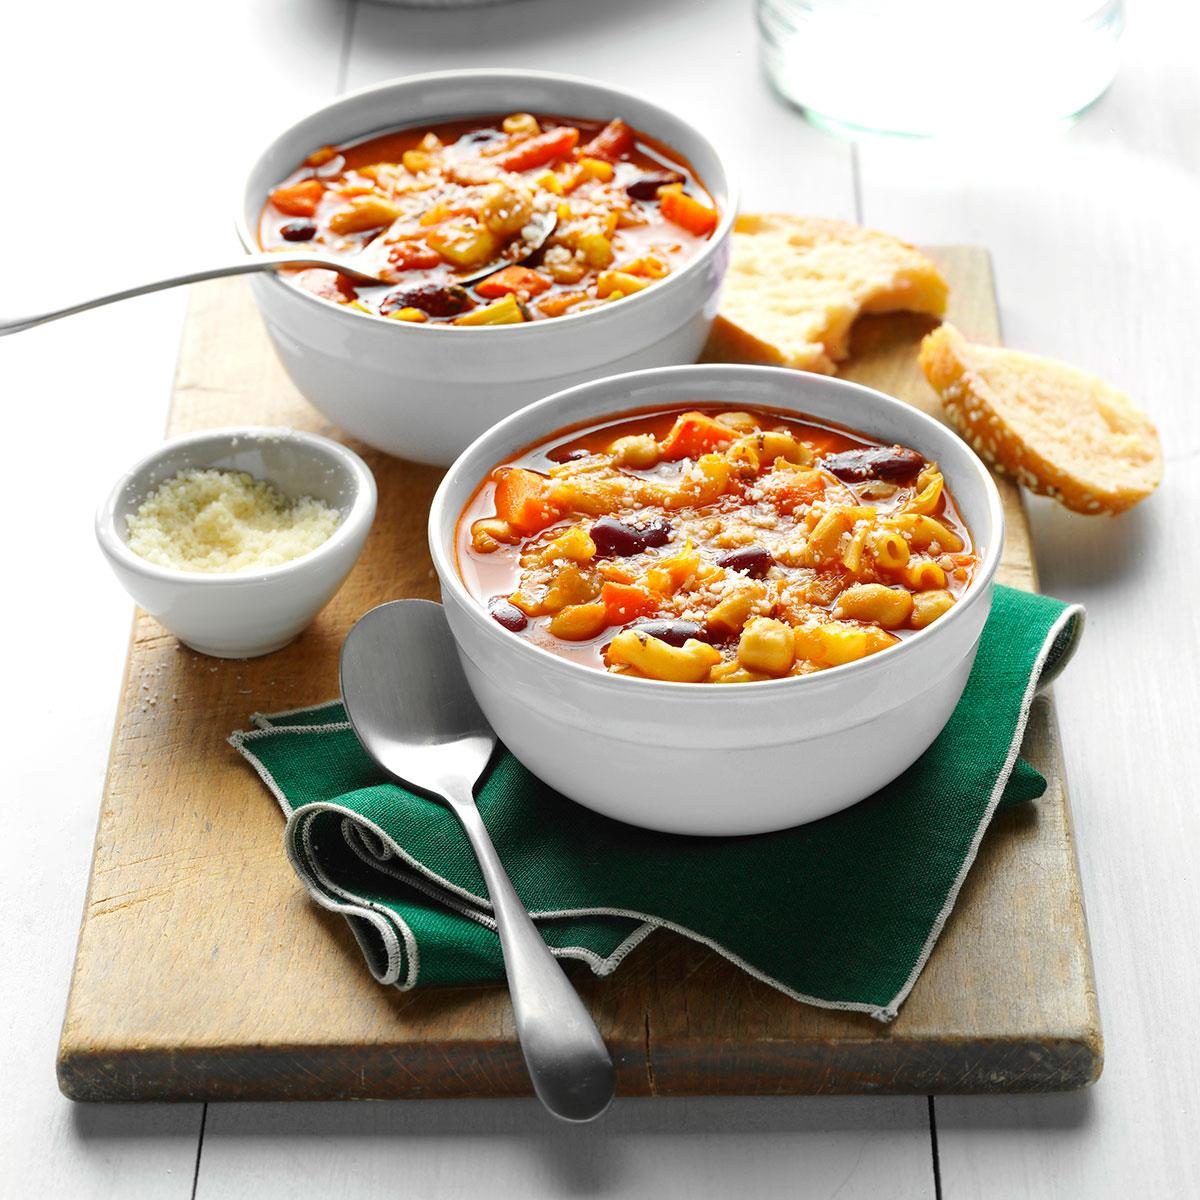 https://www.tasteofhome.com/wp-content/uploads/2017/09/Contest-Winning-Easy-Minestrone_exps119788_FM143298B03_11_2bC_RMS.jpg?fit=700%2C1024